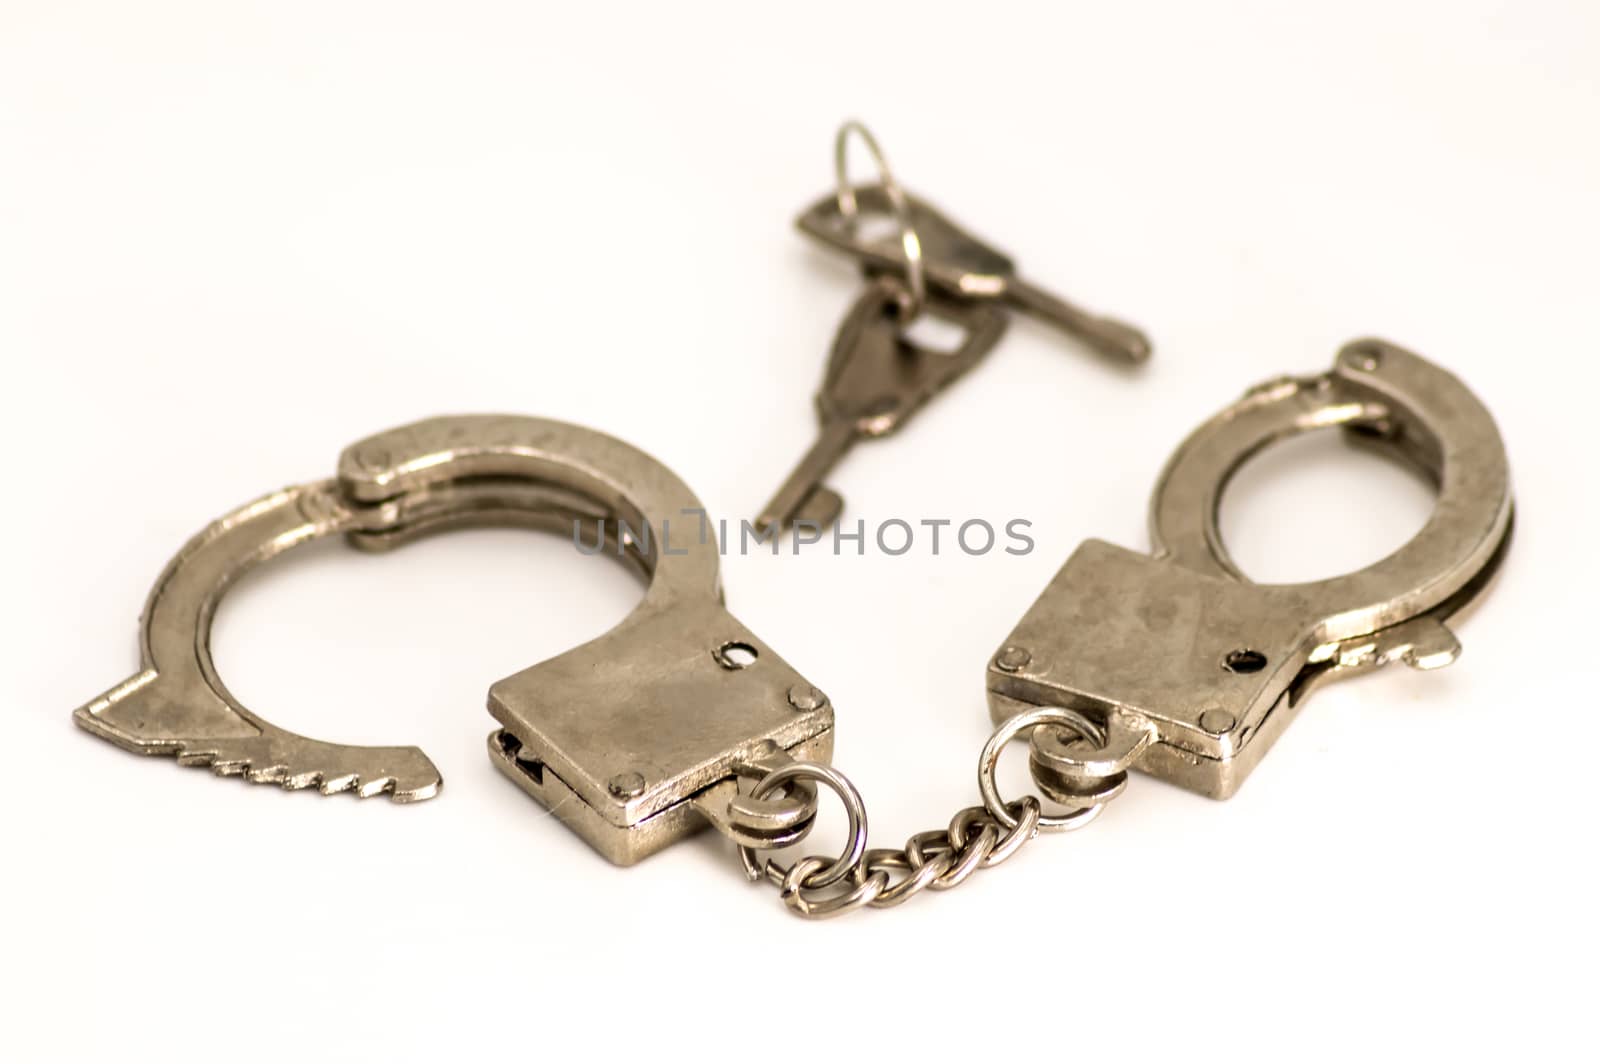 Pair of handcuffs close up front view on a white background